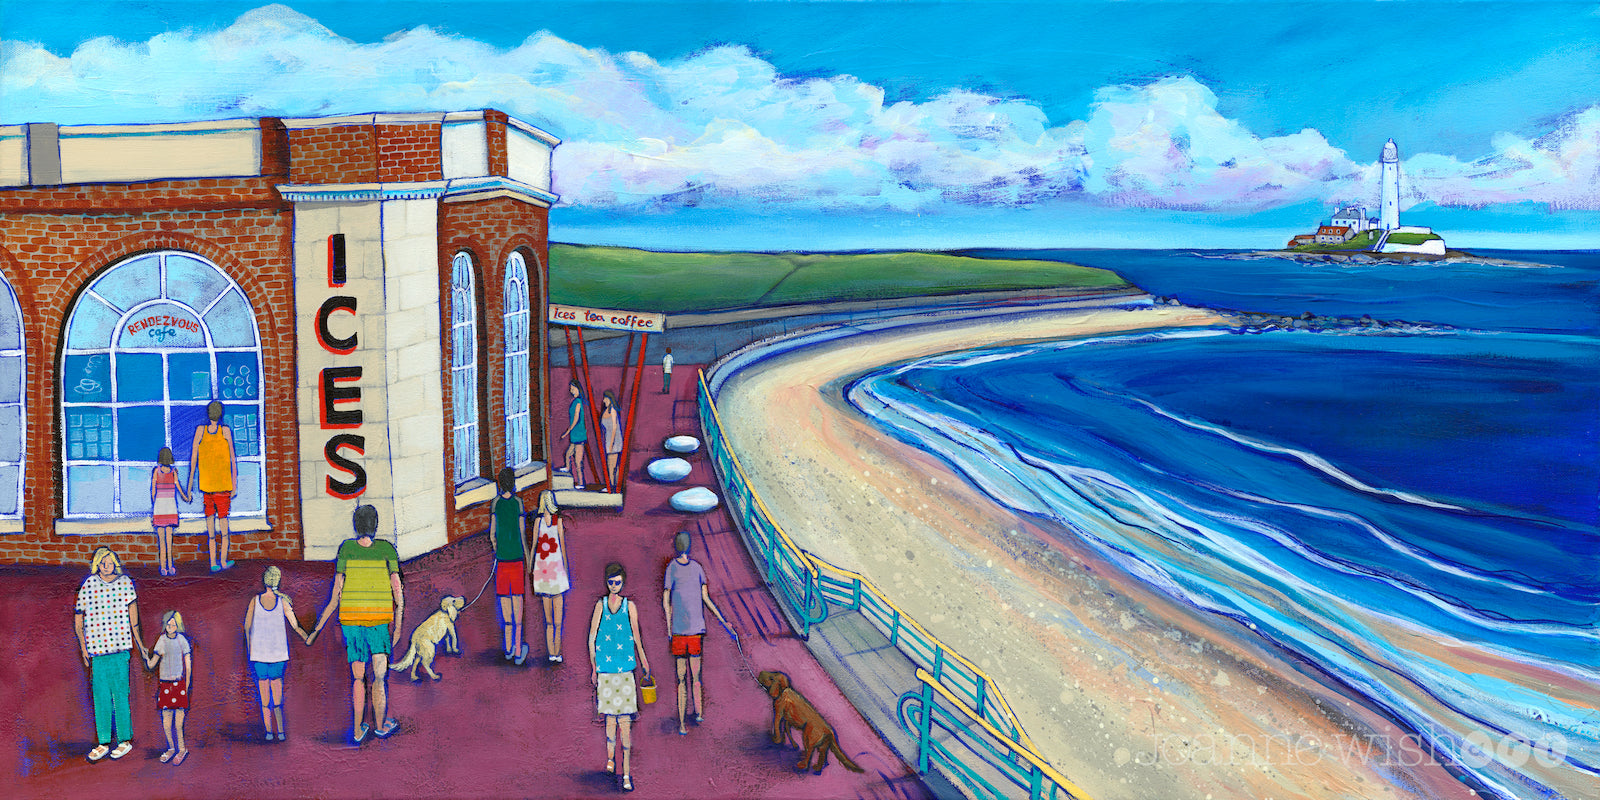 A colourful summery painting of the Rendezvous Cafe in Whitley Bay featuring the famous ICES typography painted on the wall.  St Mary&#39;s lighthouse is in the distance.